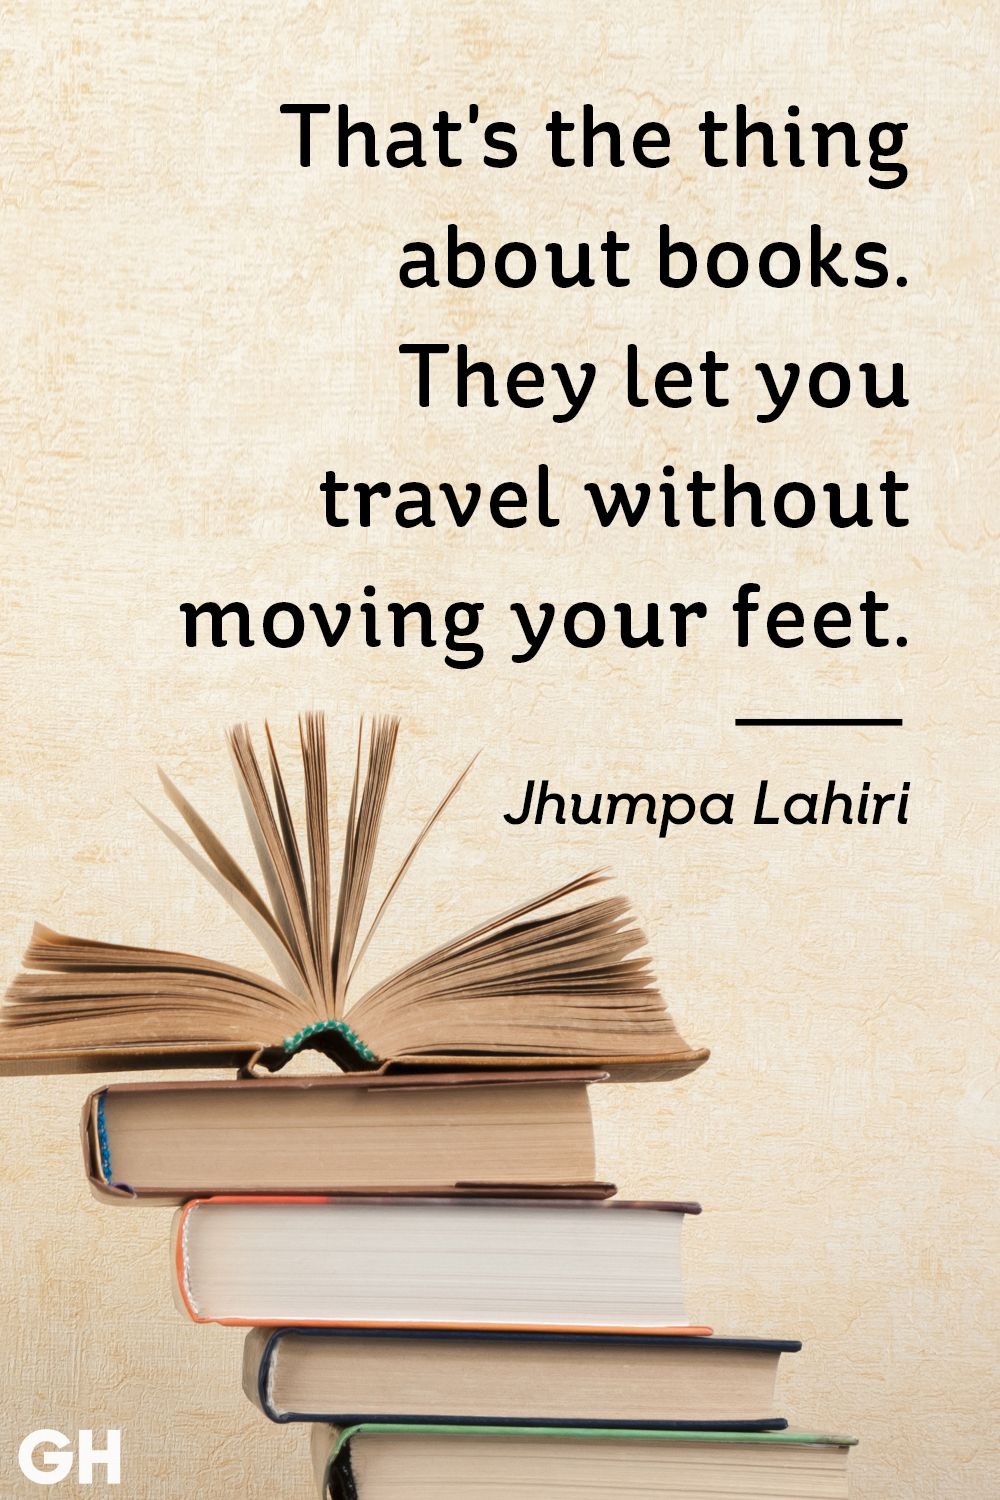 that’s the thing about books. they let you travel without moving your feet. jhumpa lahiri